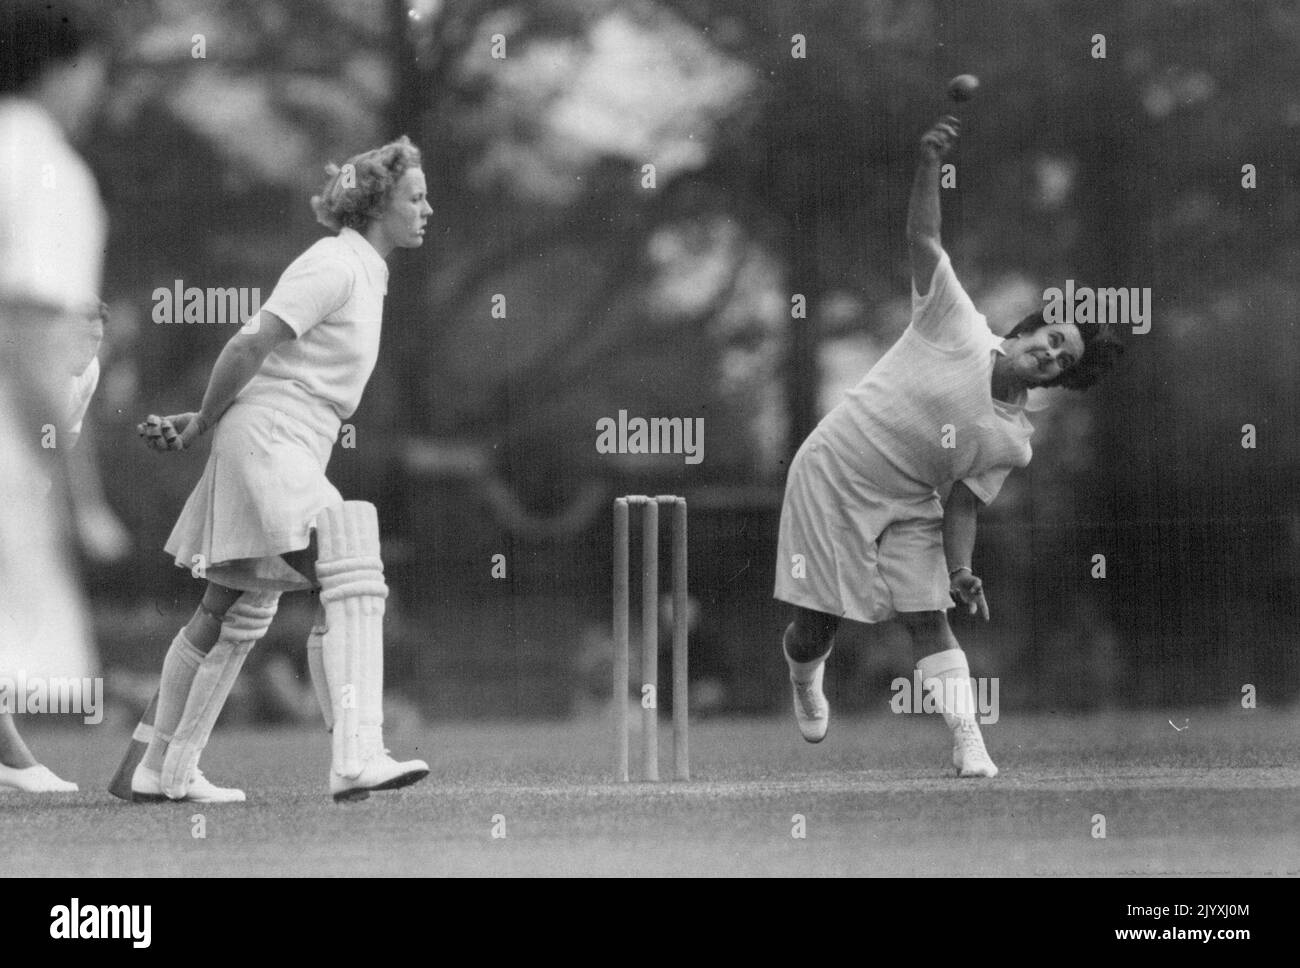 Girl Who 'Bowls 'EM Over' -- Proving the female of the species is even deadlier than the male, Australia's Alma Vogt clenches her teeth as she whips over a 'snorter' in the women's cricket match against Kent on Sevenoaks Vine, Sevenoaks. Kent, to-day (Saturday). The match opened the Australian women cricketers 1951 tour in Britain. May 19, 1951. (Photo by Reuterphoto). Stock Photo